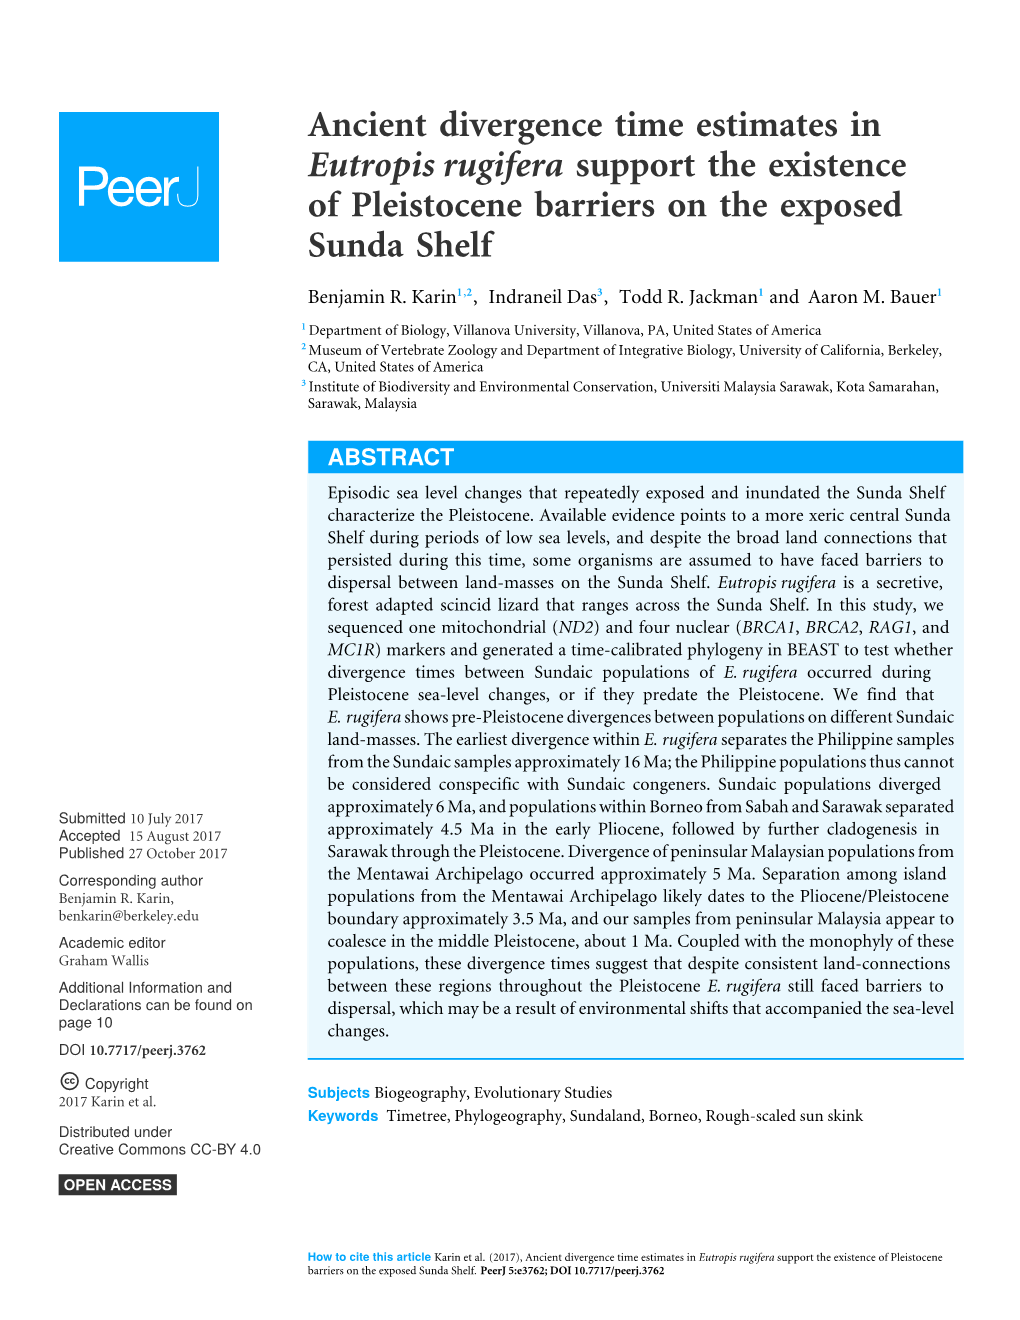 Ancient Divergence Time Estimates in Eutropis Rugifera Support the Existence of Pleistocene Barriers on the Exposed Sunda Shelf